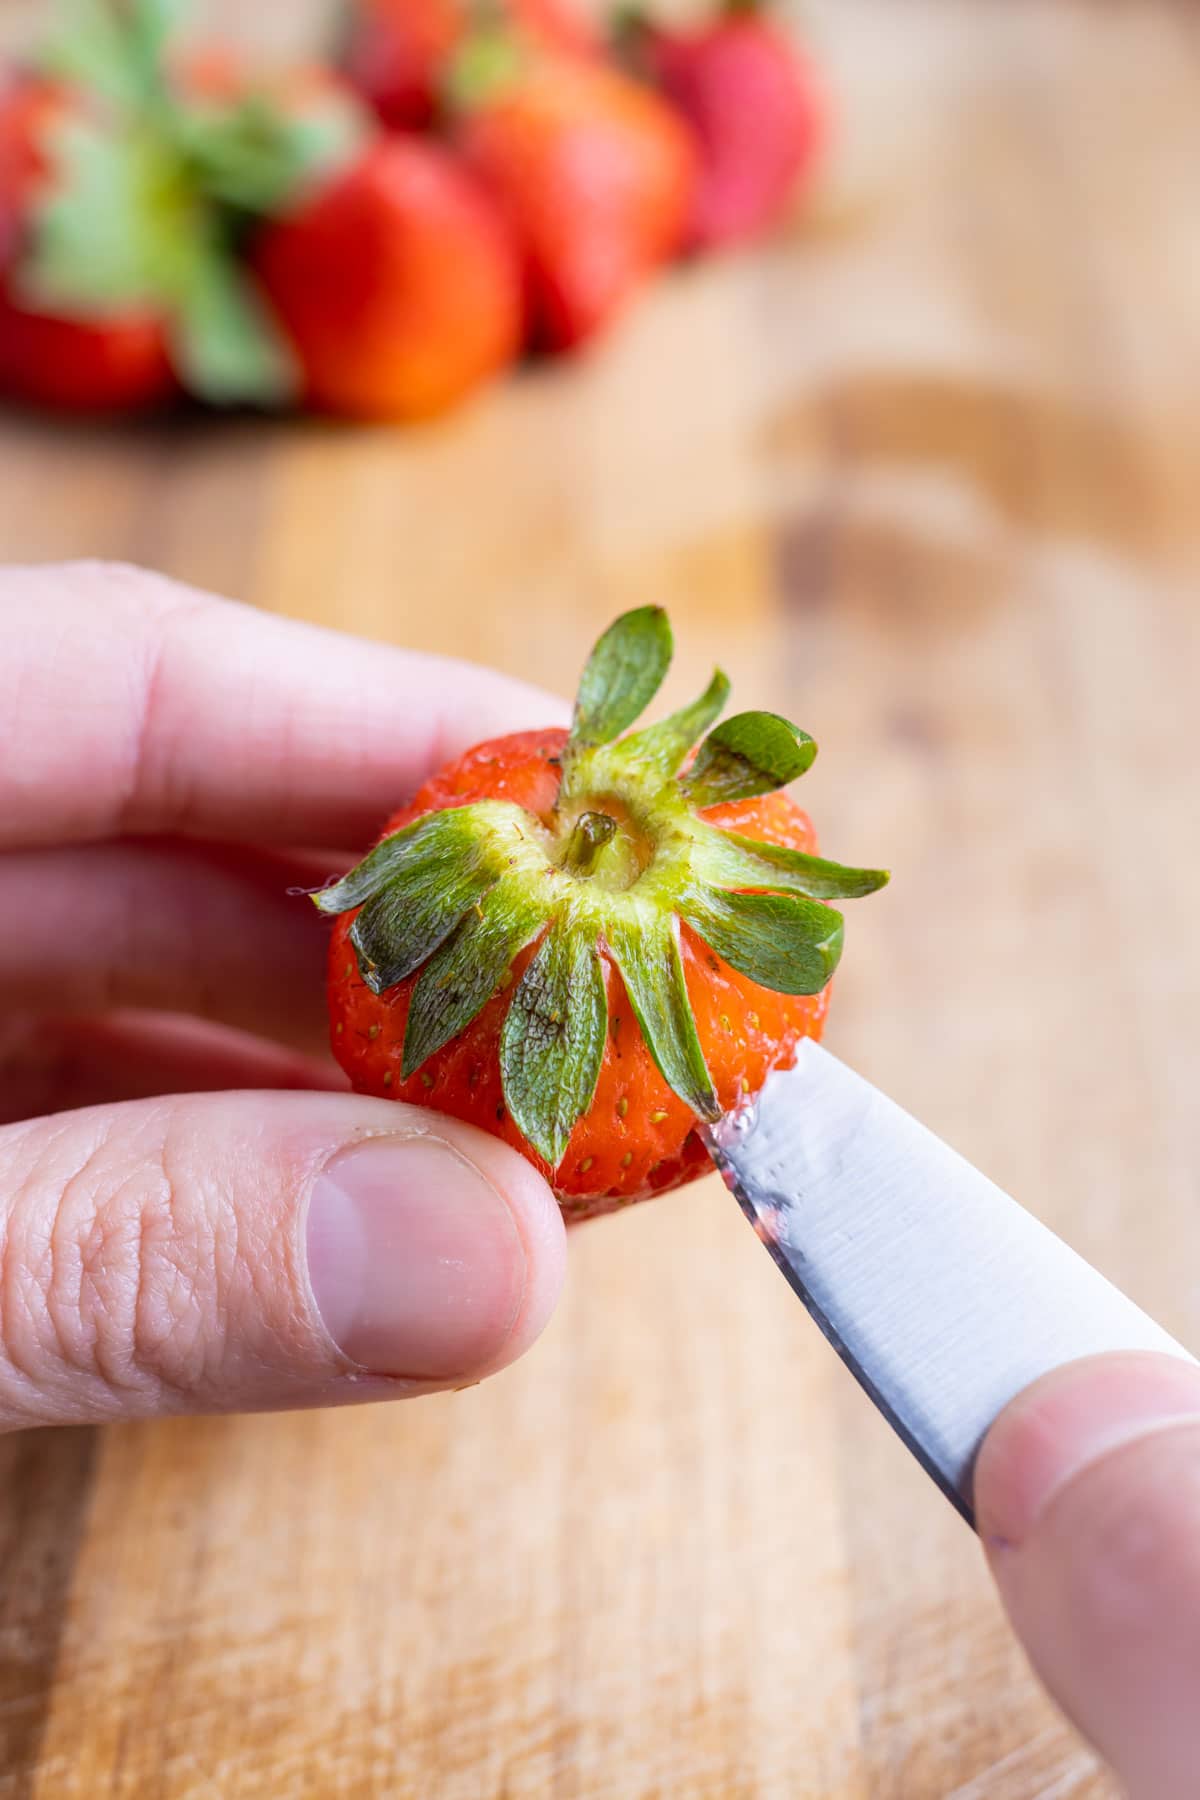 The stem is removed from the strawberries with a knife.